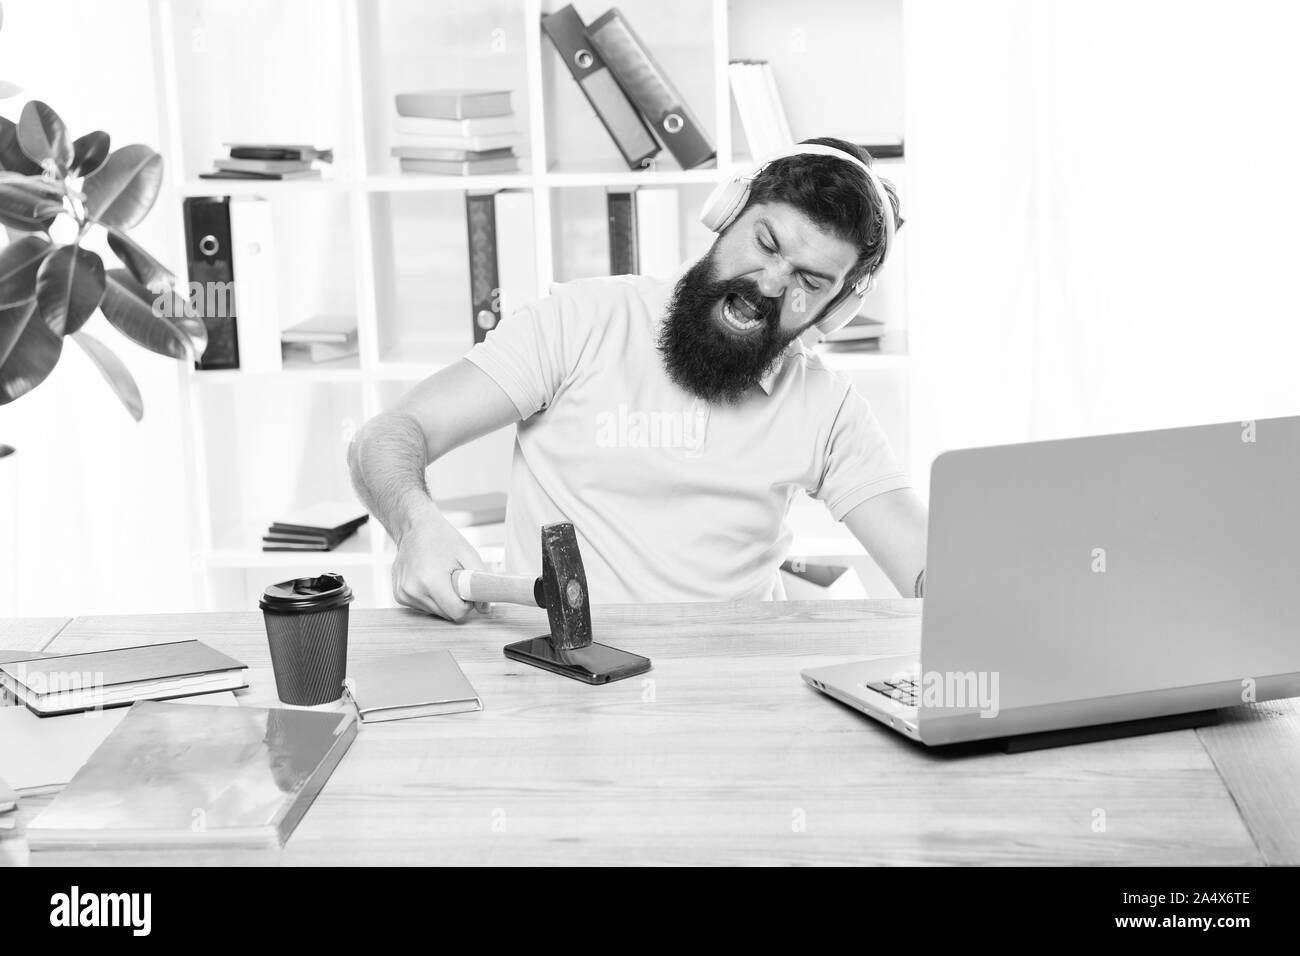 Spoiled communication. Failed mobile negotiations. Most annoying thing about work in call center. Incoming call. Annoying client calling. Man bearded guy headphones office swing hammer on smartphone. Stock Photo